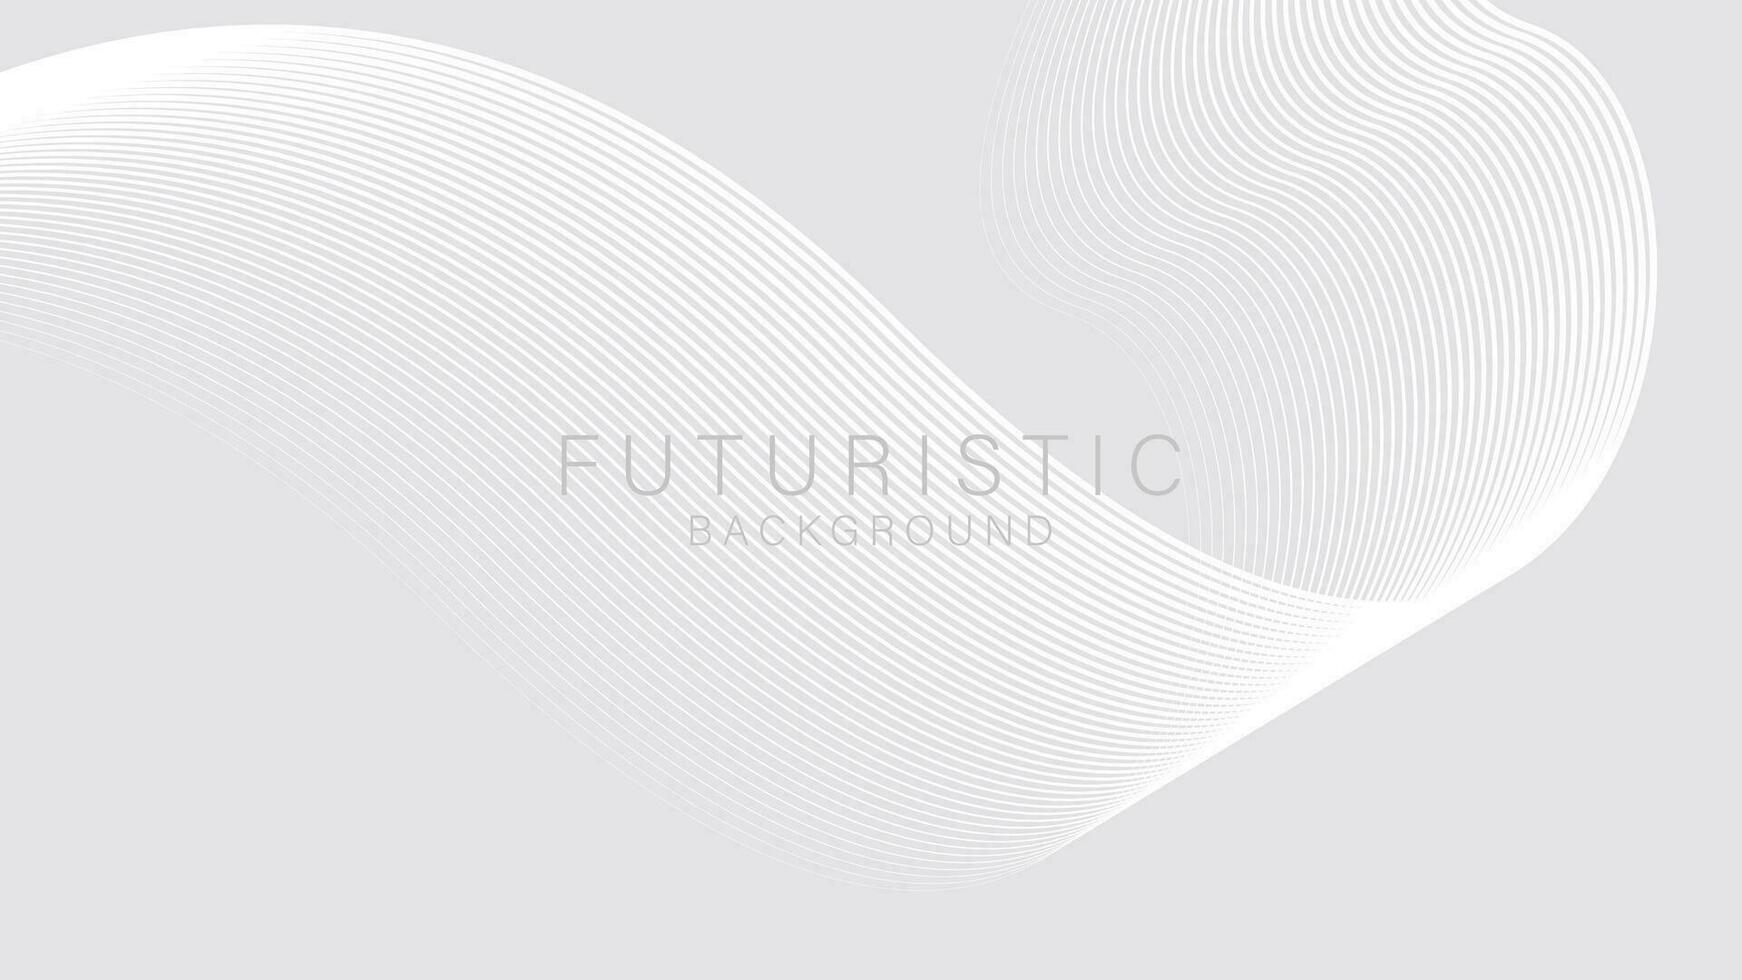 White Futuristic abstract background with minimalist line waves. Suitable for banners, wallpapers, presentations, posters. Vector illustration